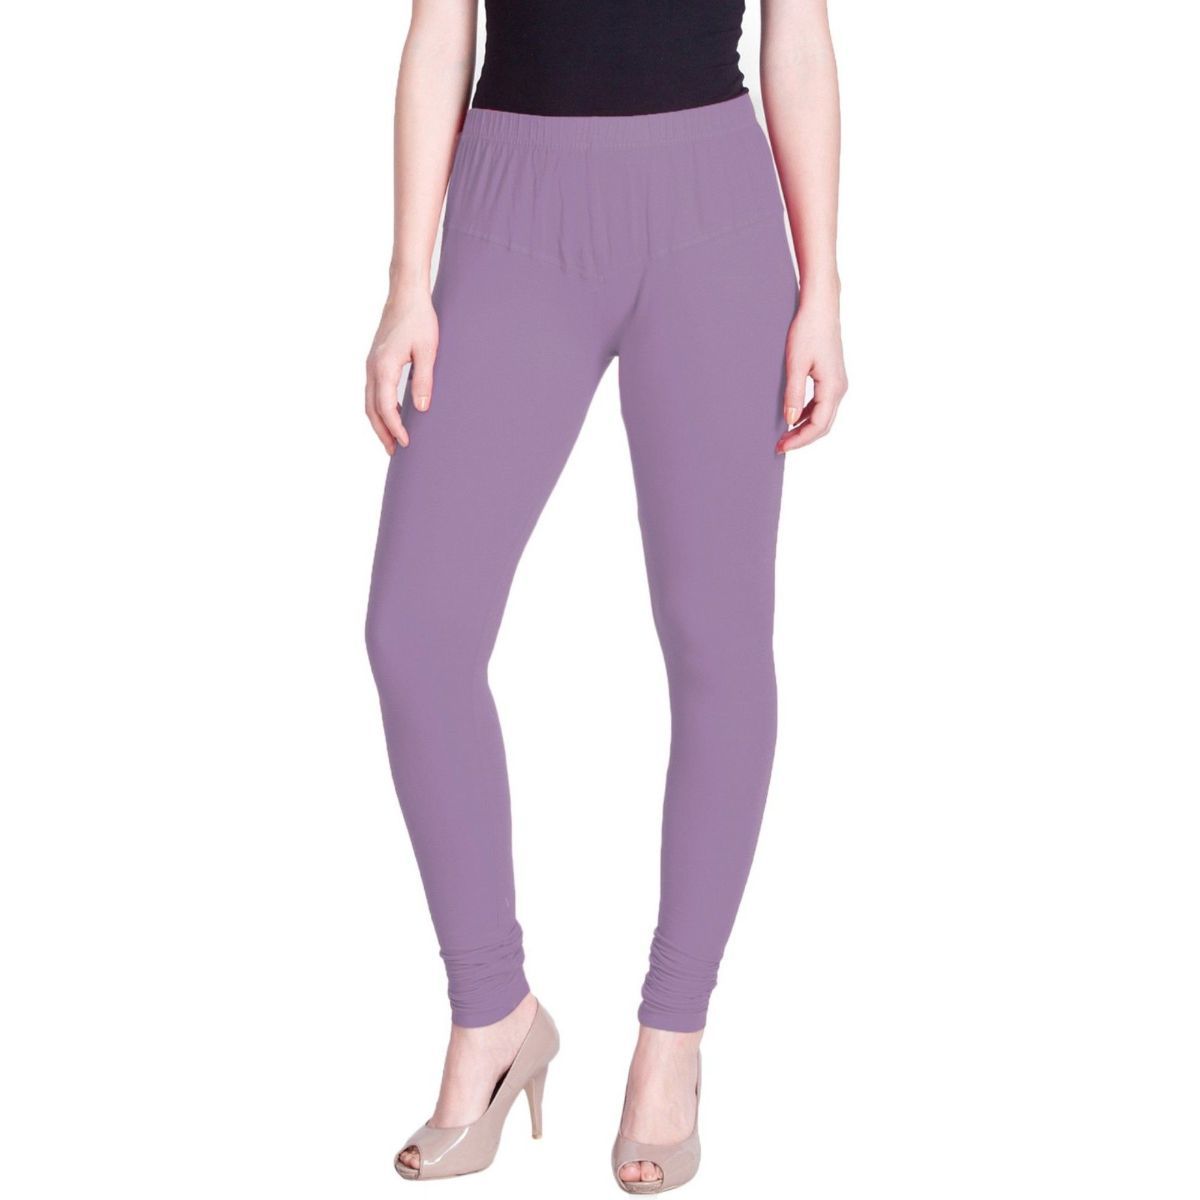 Meera Fashion Ladies Leggings Spendex And Lycra Material - Purple - 34-sonthuy.vn